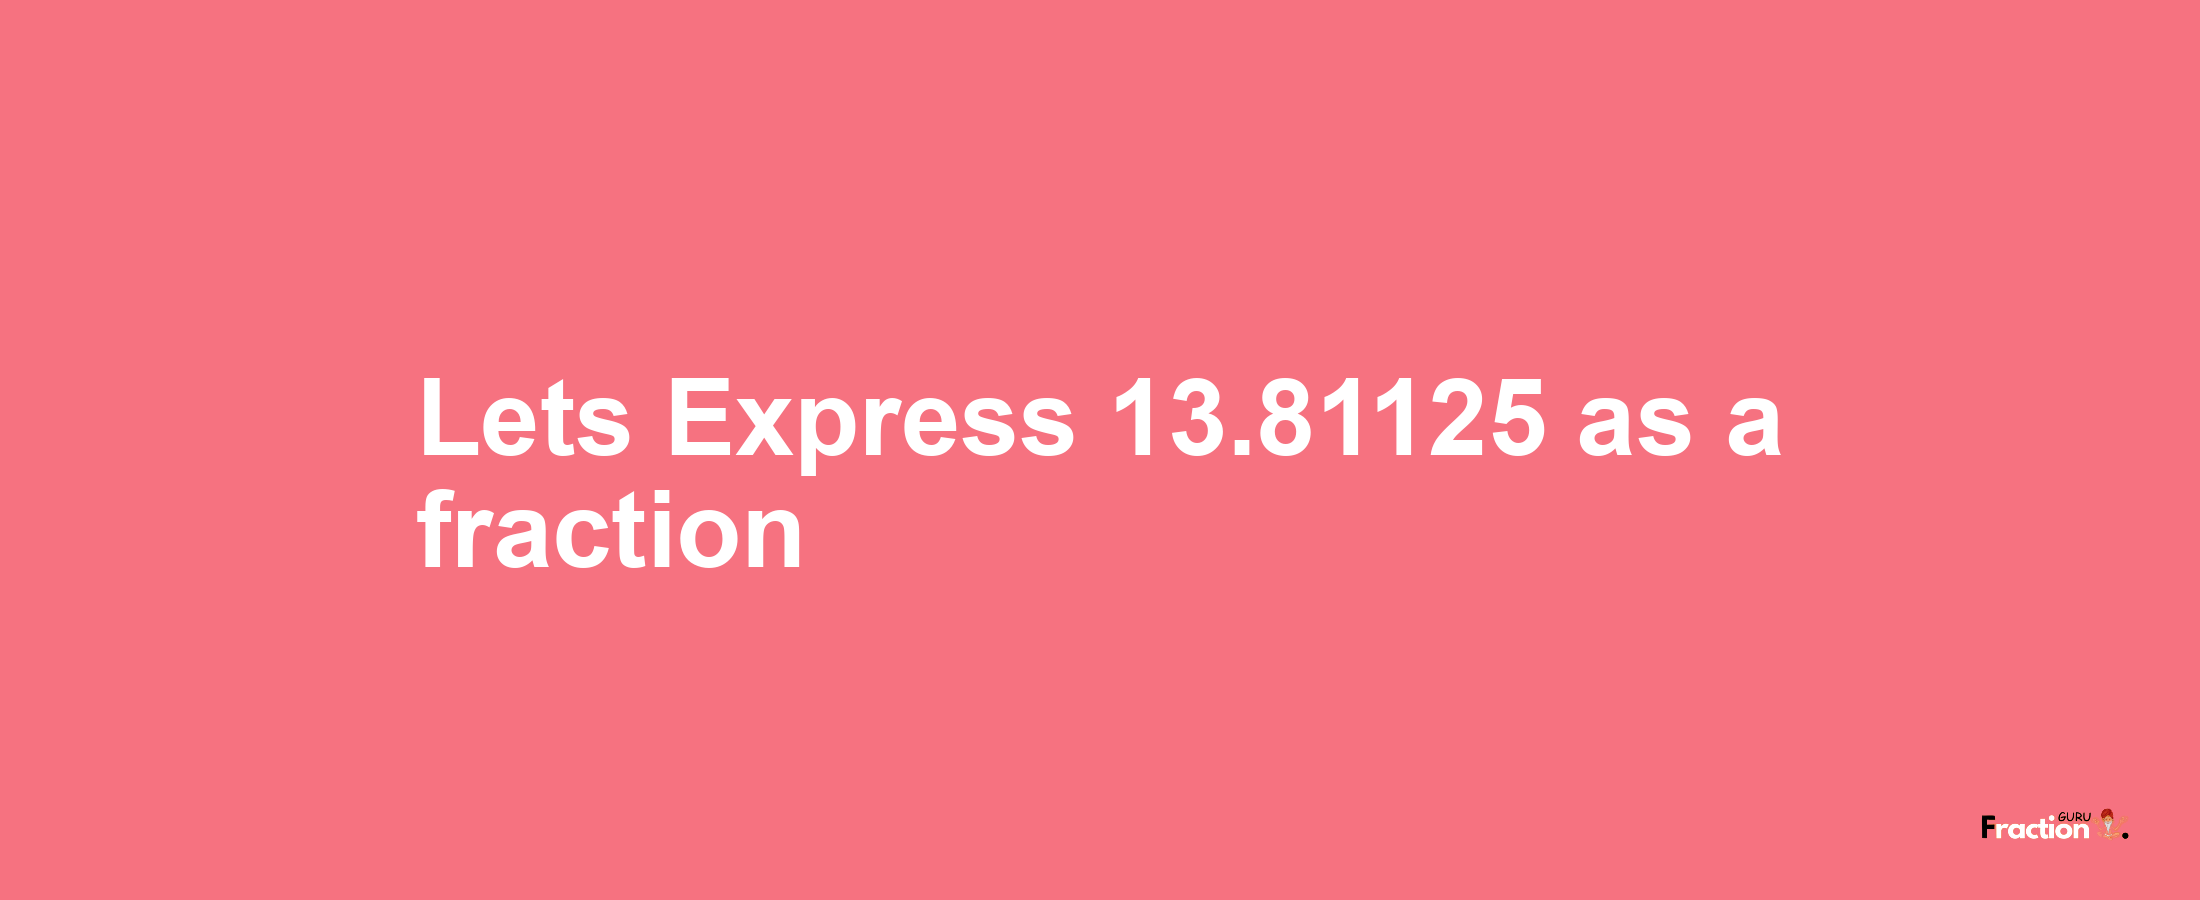 Lets Express 13.81125 as afraction